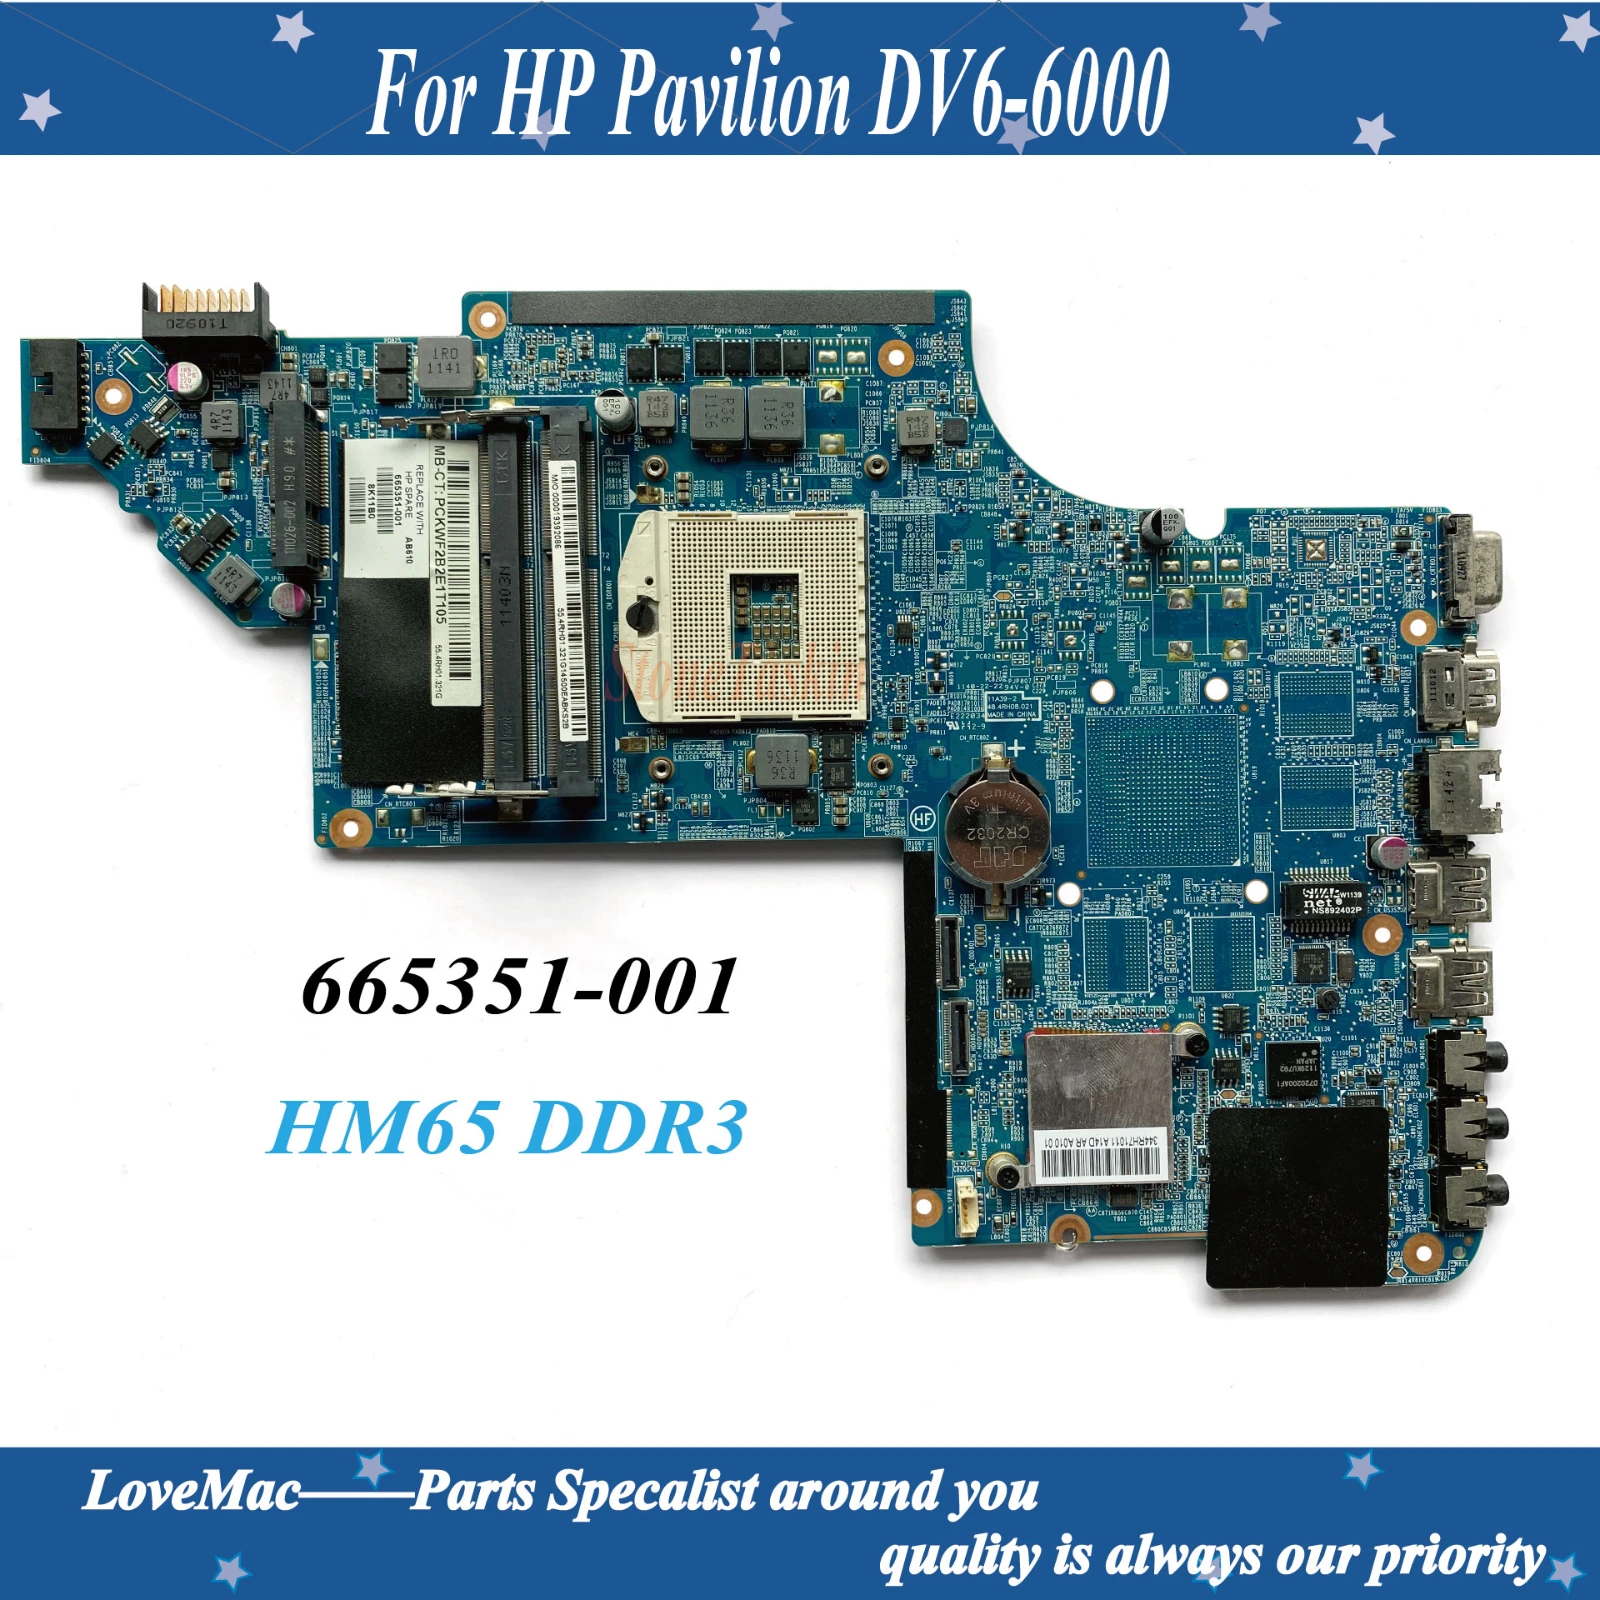 

High Quality 665351-001 For HP Pavilion DV6-6000 Laptop Motherboard 665351-001 HM65 DDR3 100% tested